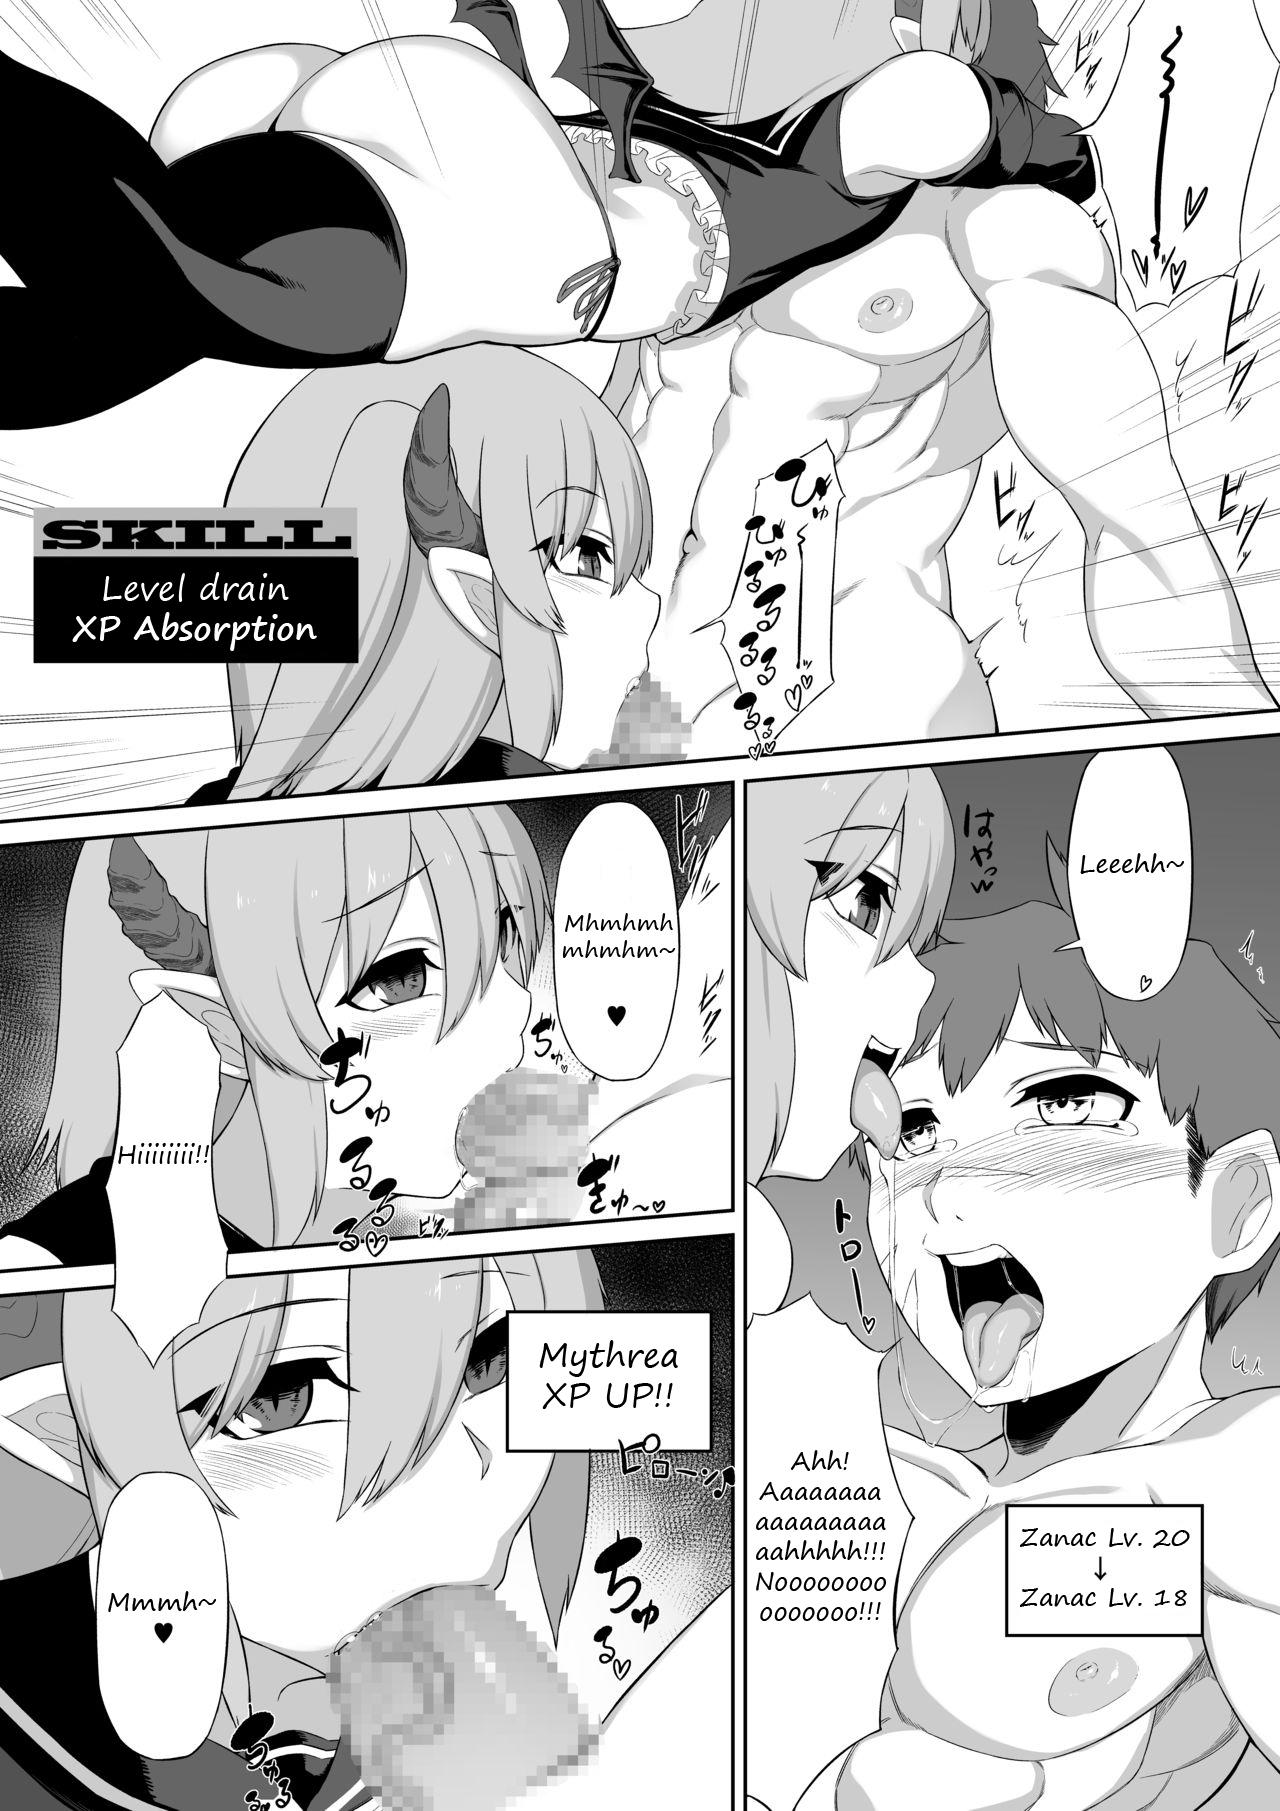 Shecock Futago Succubus to Mahou no Onaho | The Succubus Twins and the Magical Onahole - Original Bwc - Page 10